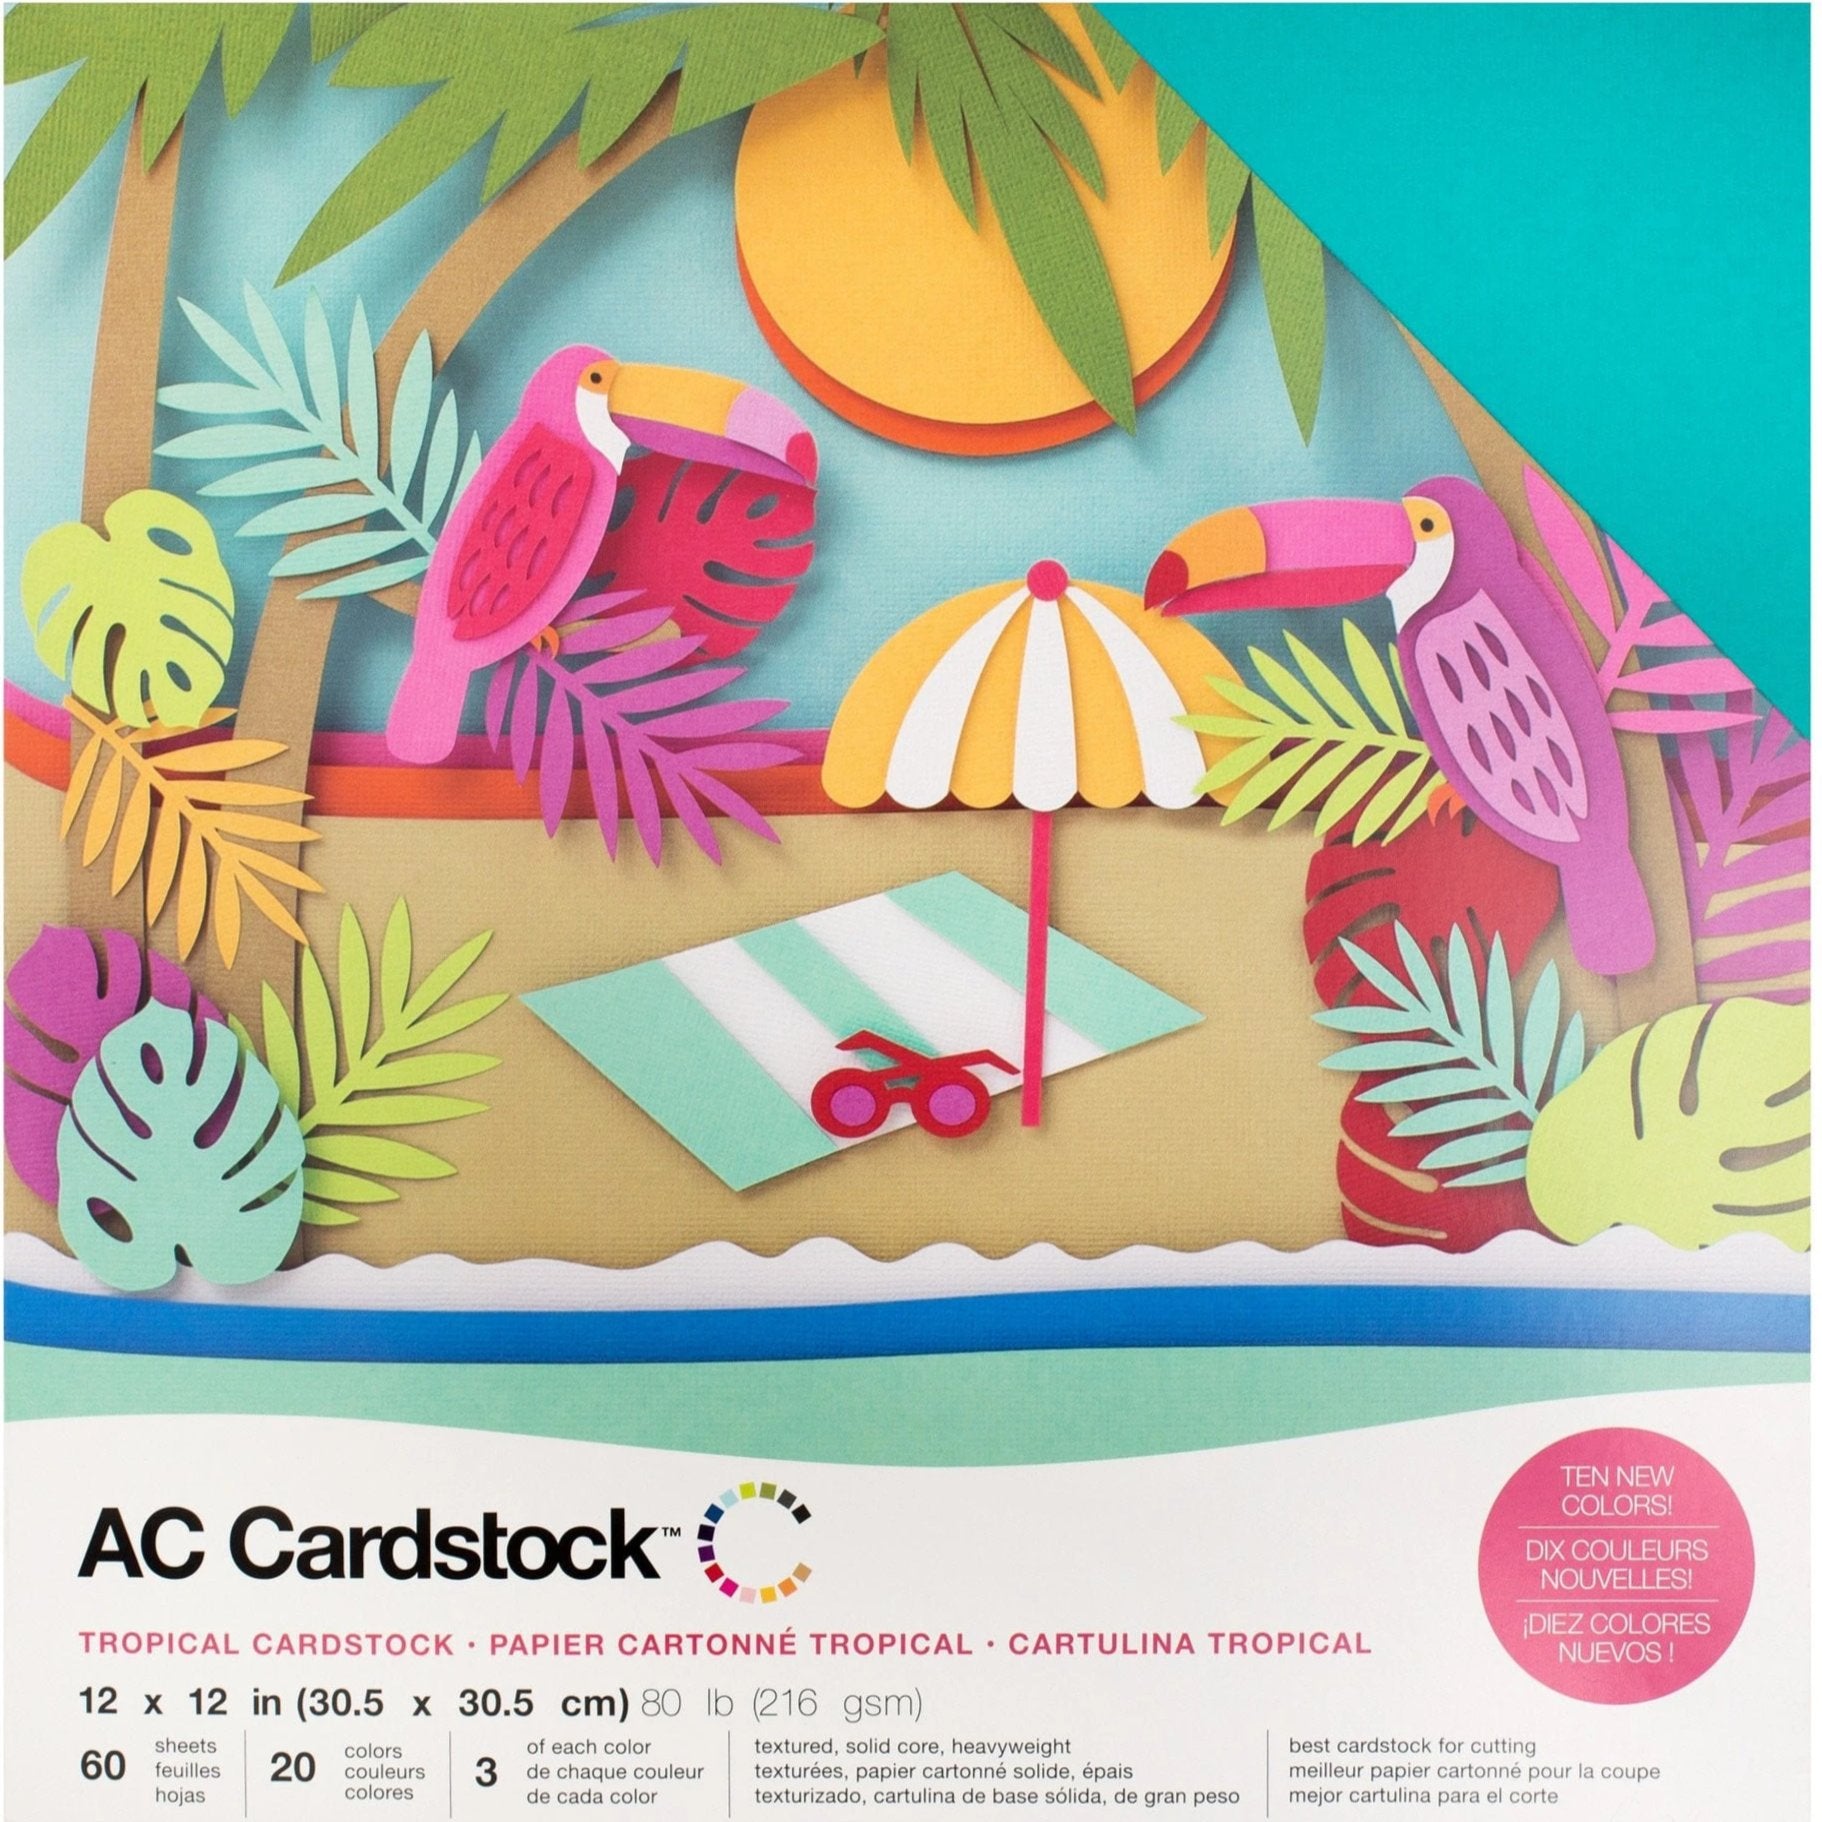 12 x 12-inch White AC Cardstock Pack by American Crafts | Includes 60  sheets of heavy weight, textured white cardstock